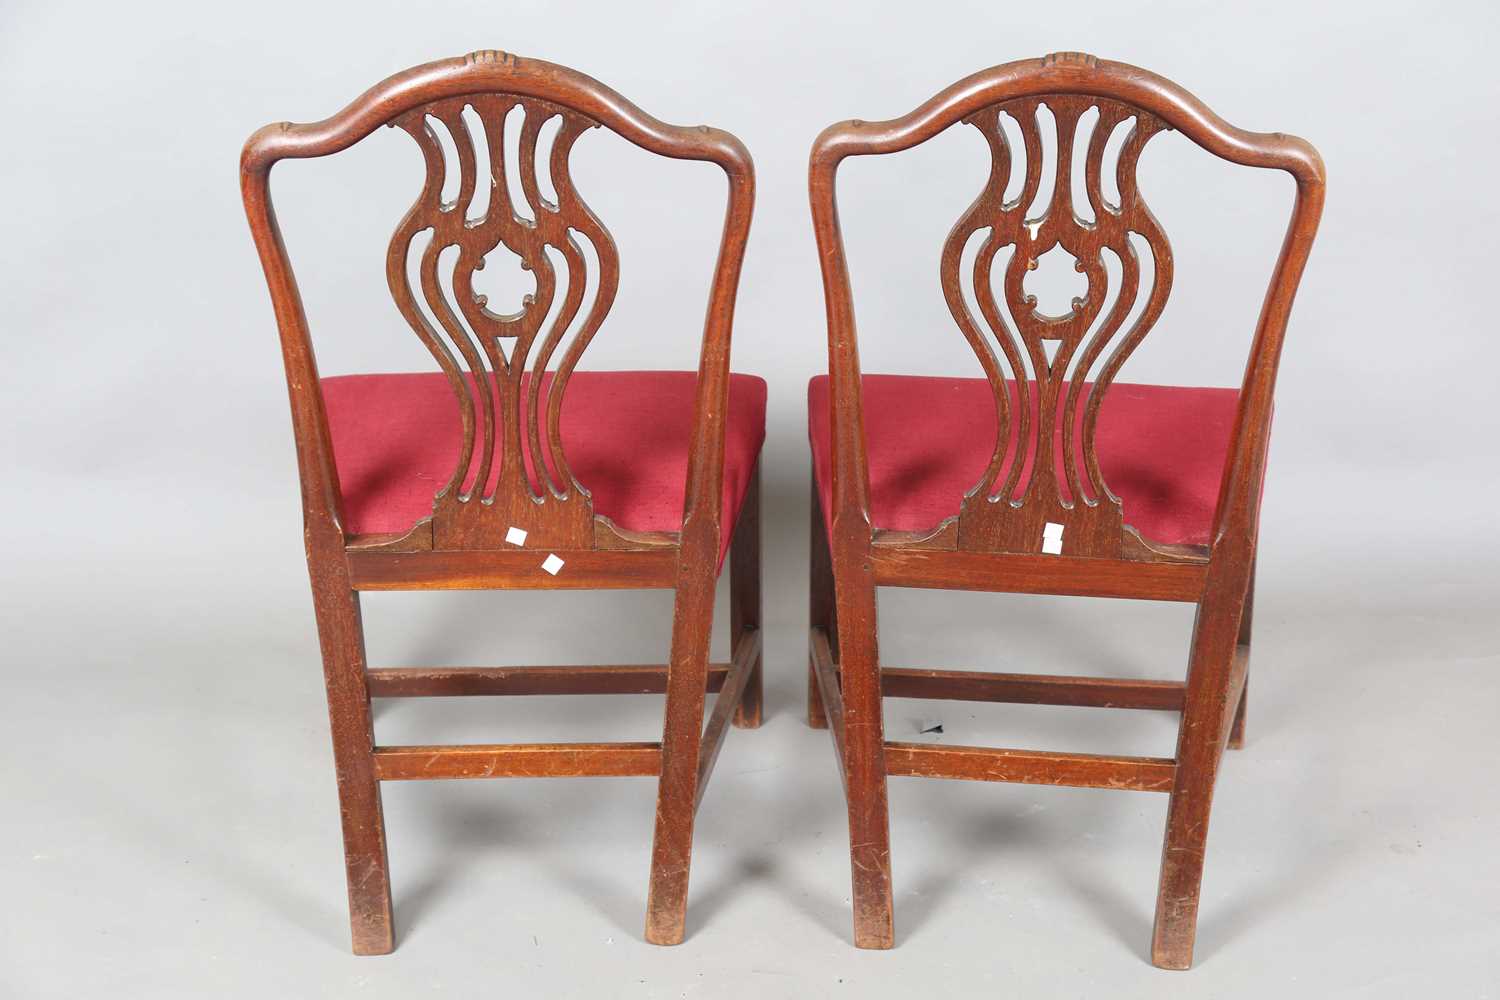 A pair of George III Chippendale period mahogany dining chairs with pierced splat backs and - Image 10 of 12